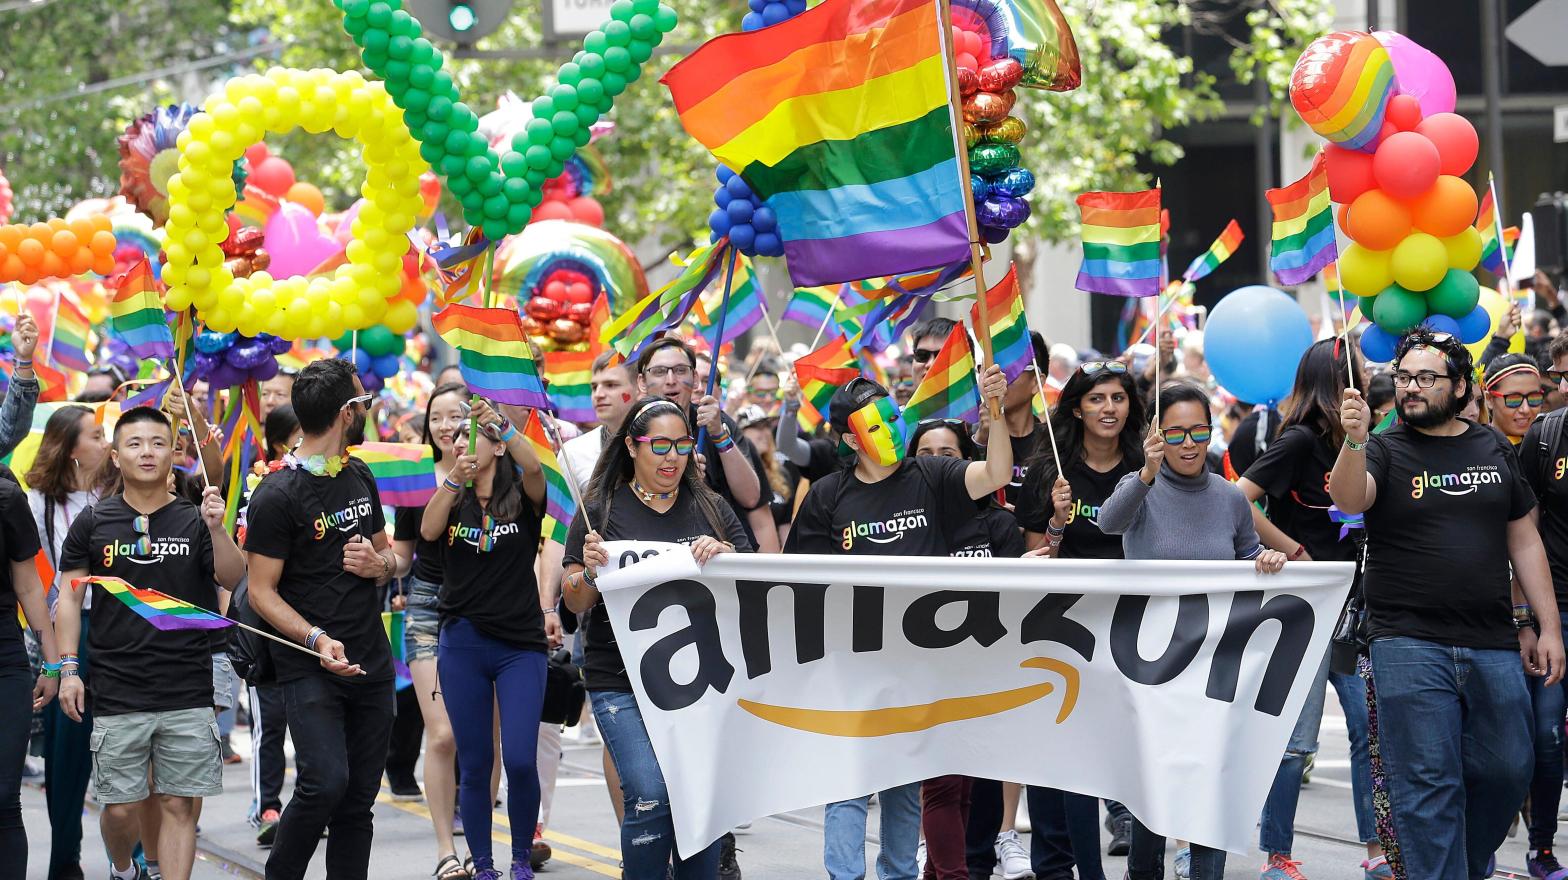 Amazon was one of 400 companies that signed on to support LGBTQ legislation rights in the U.S. (Photo: Jeff Chiu, AP)